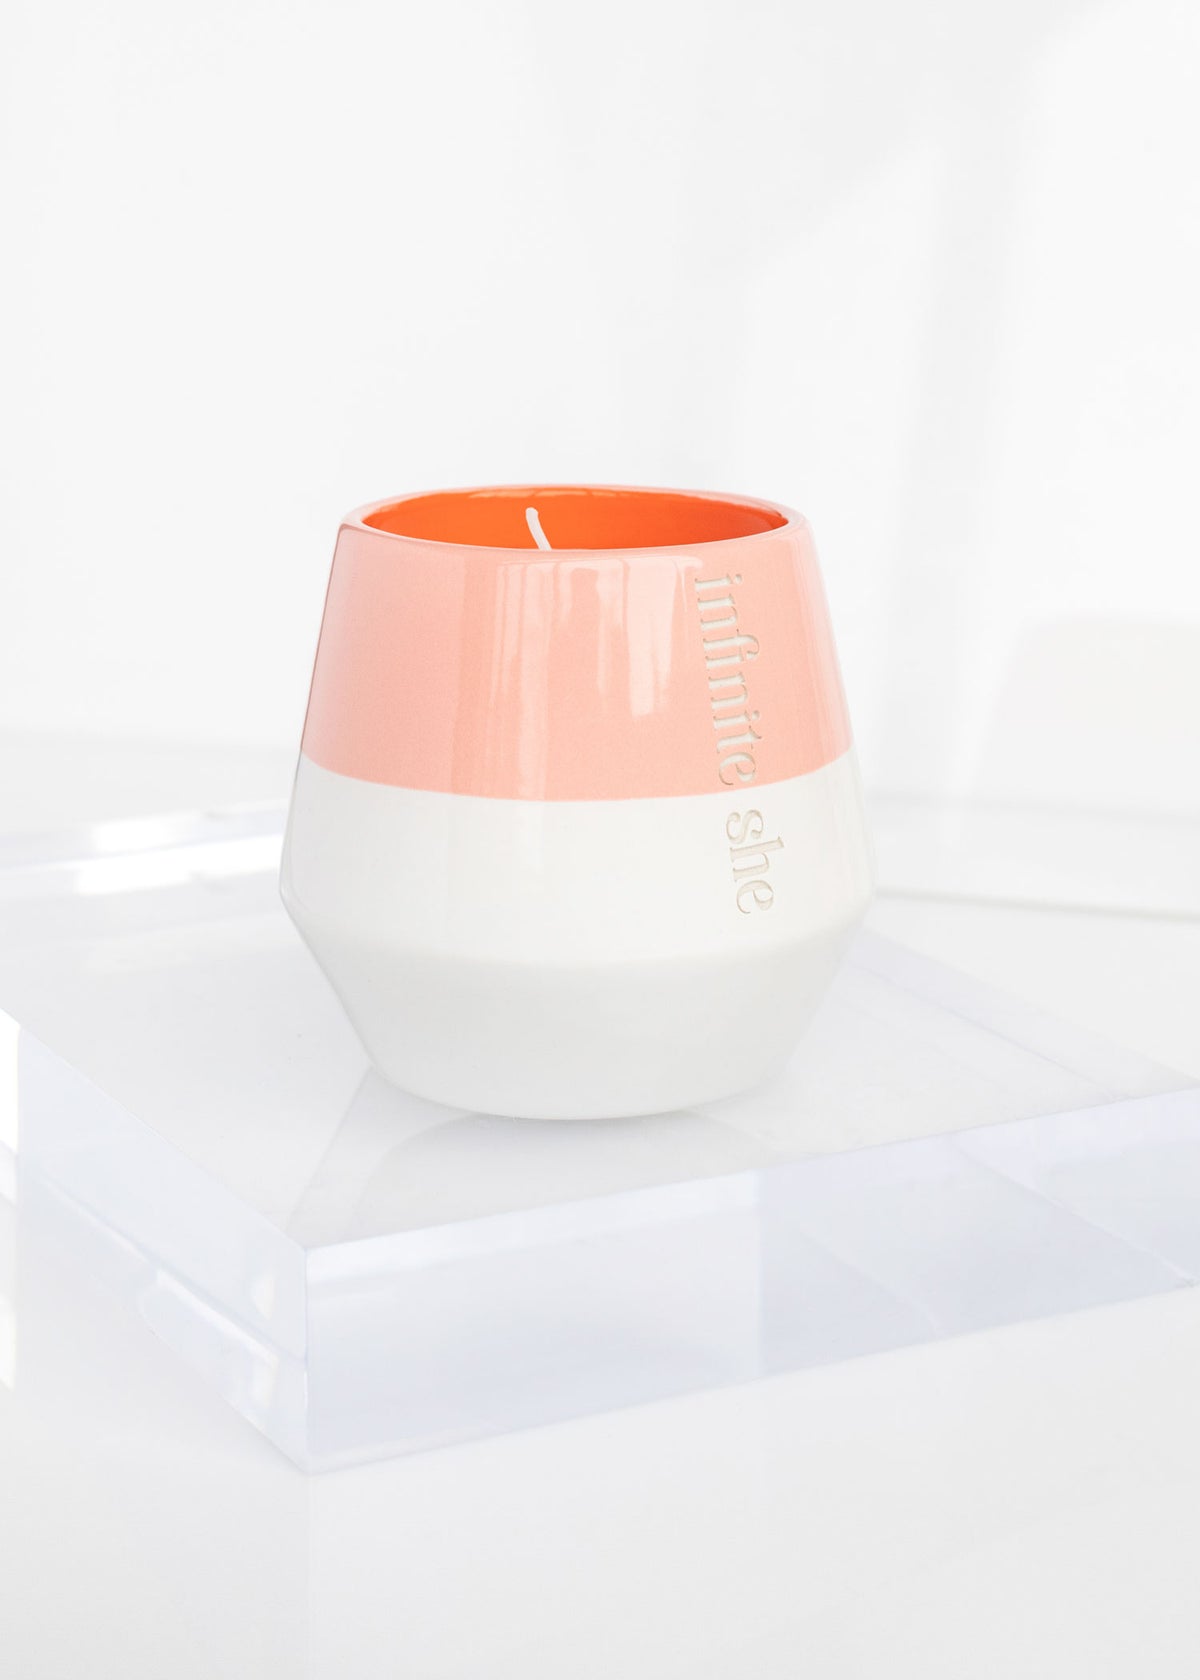 A modern, two-tone Infinite She Raise Your Torch Ceramic Candle in a white and coral container labeled "Margot Elena" on a transparent surface with a white backdrop, crafted from a Soy + Coconut Wax Blend.